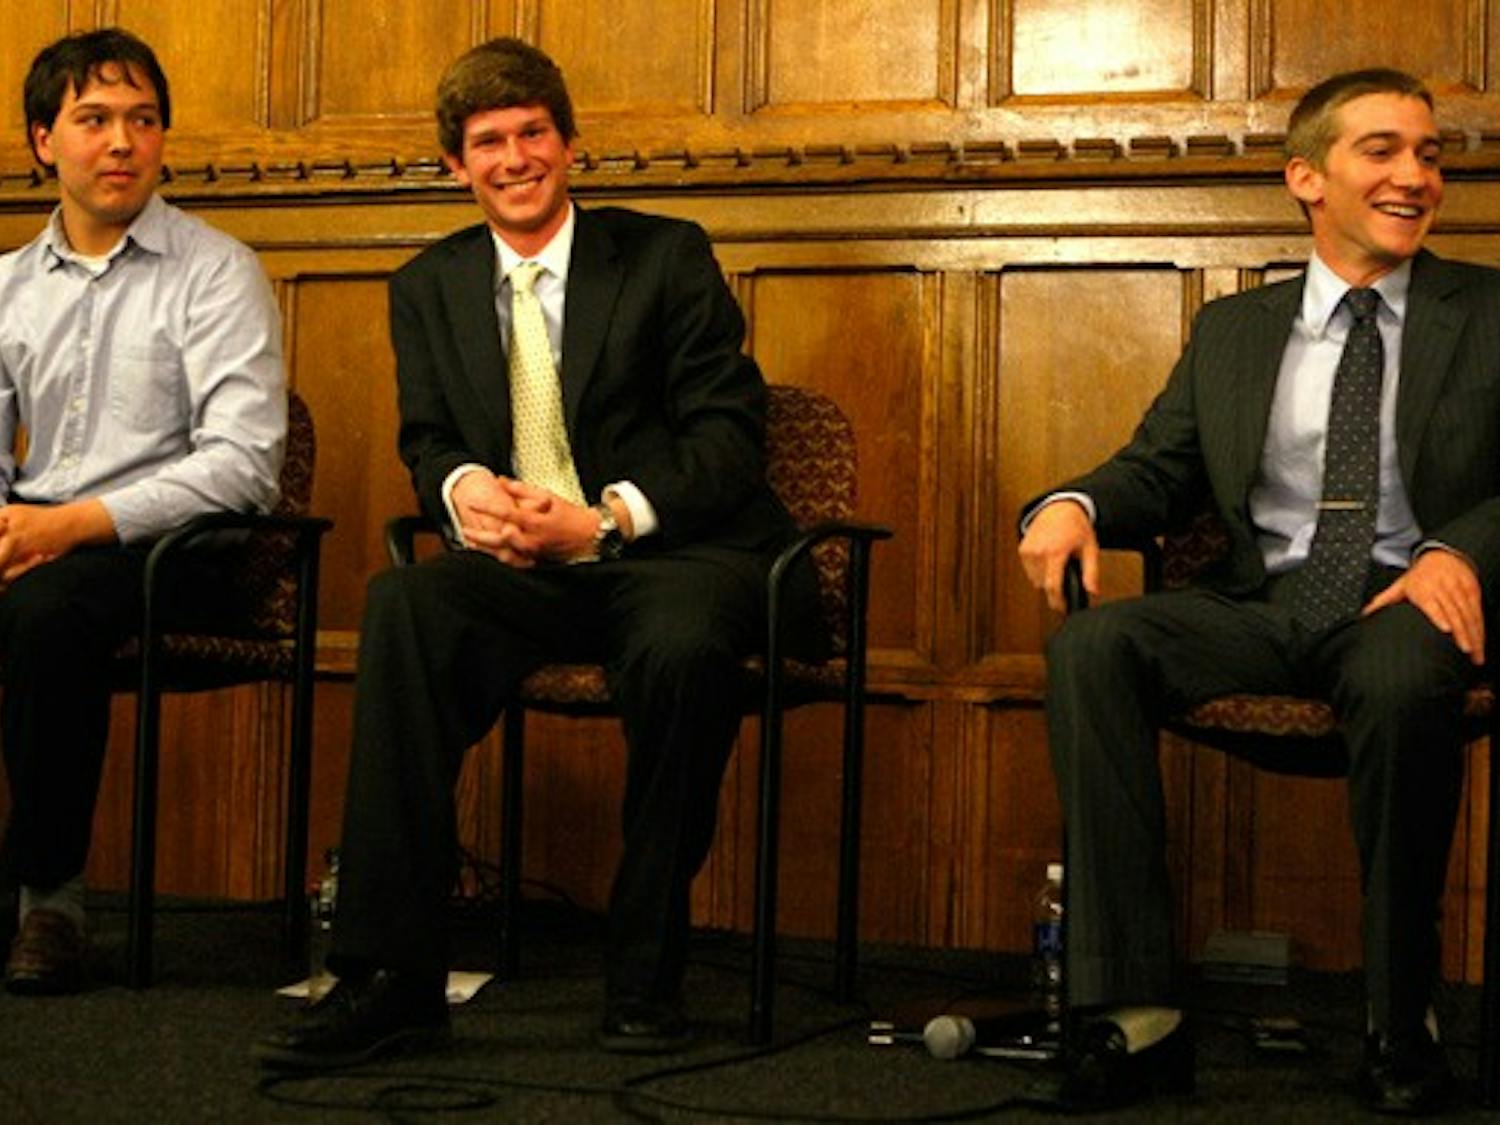 The three Duke Student Government presidential candidates—juniors Will Passo (left), Gregory Morrison (center) and Mike Lefevre (right)—face off in the pre-election debate in the Great Hall Wednesday night. The candidates outlined their individual platforms and took questions from the 50 students in attendance.